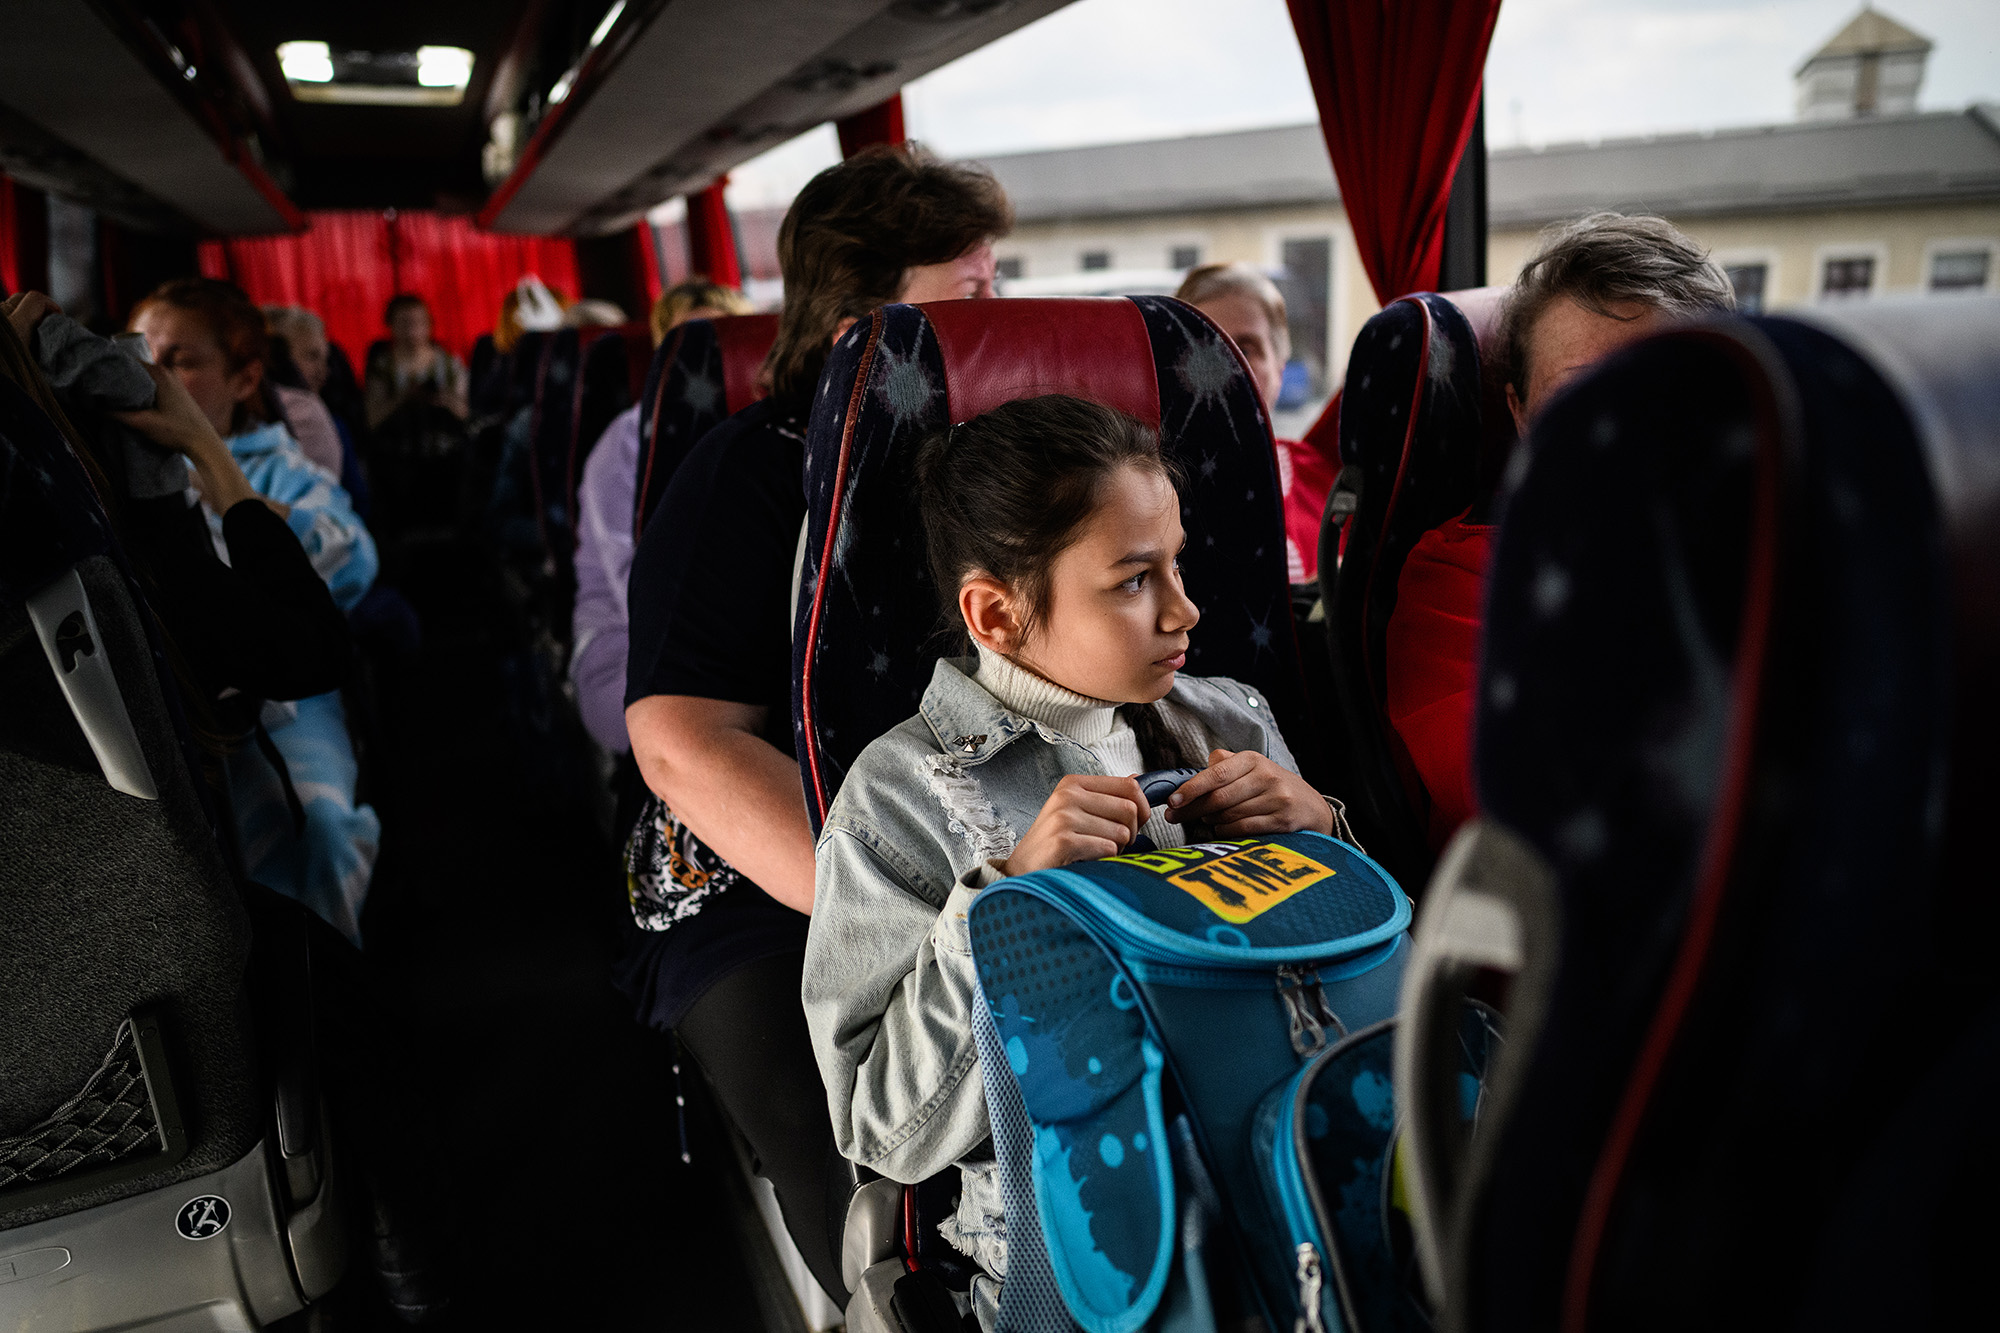 A young girl clutches her backpack as she sits on a bus in Lviv, Ukraine, leaving for Warsaw in Poland, carrying refugees from regions of southern and eastern Ukraine, on May 3.